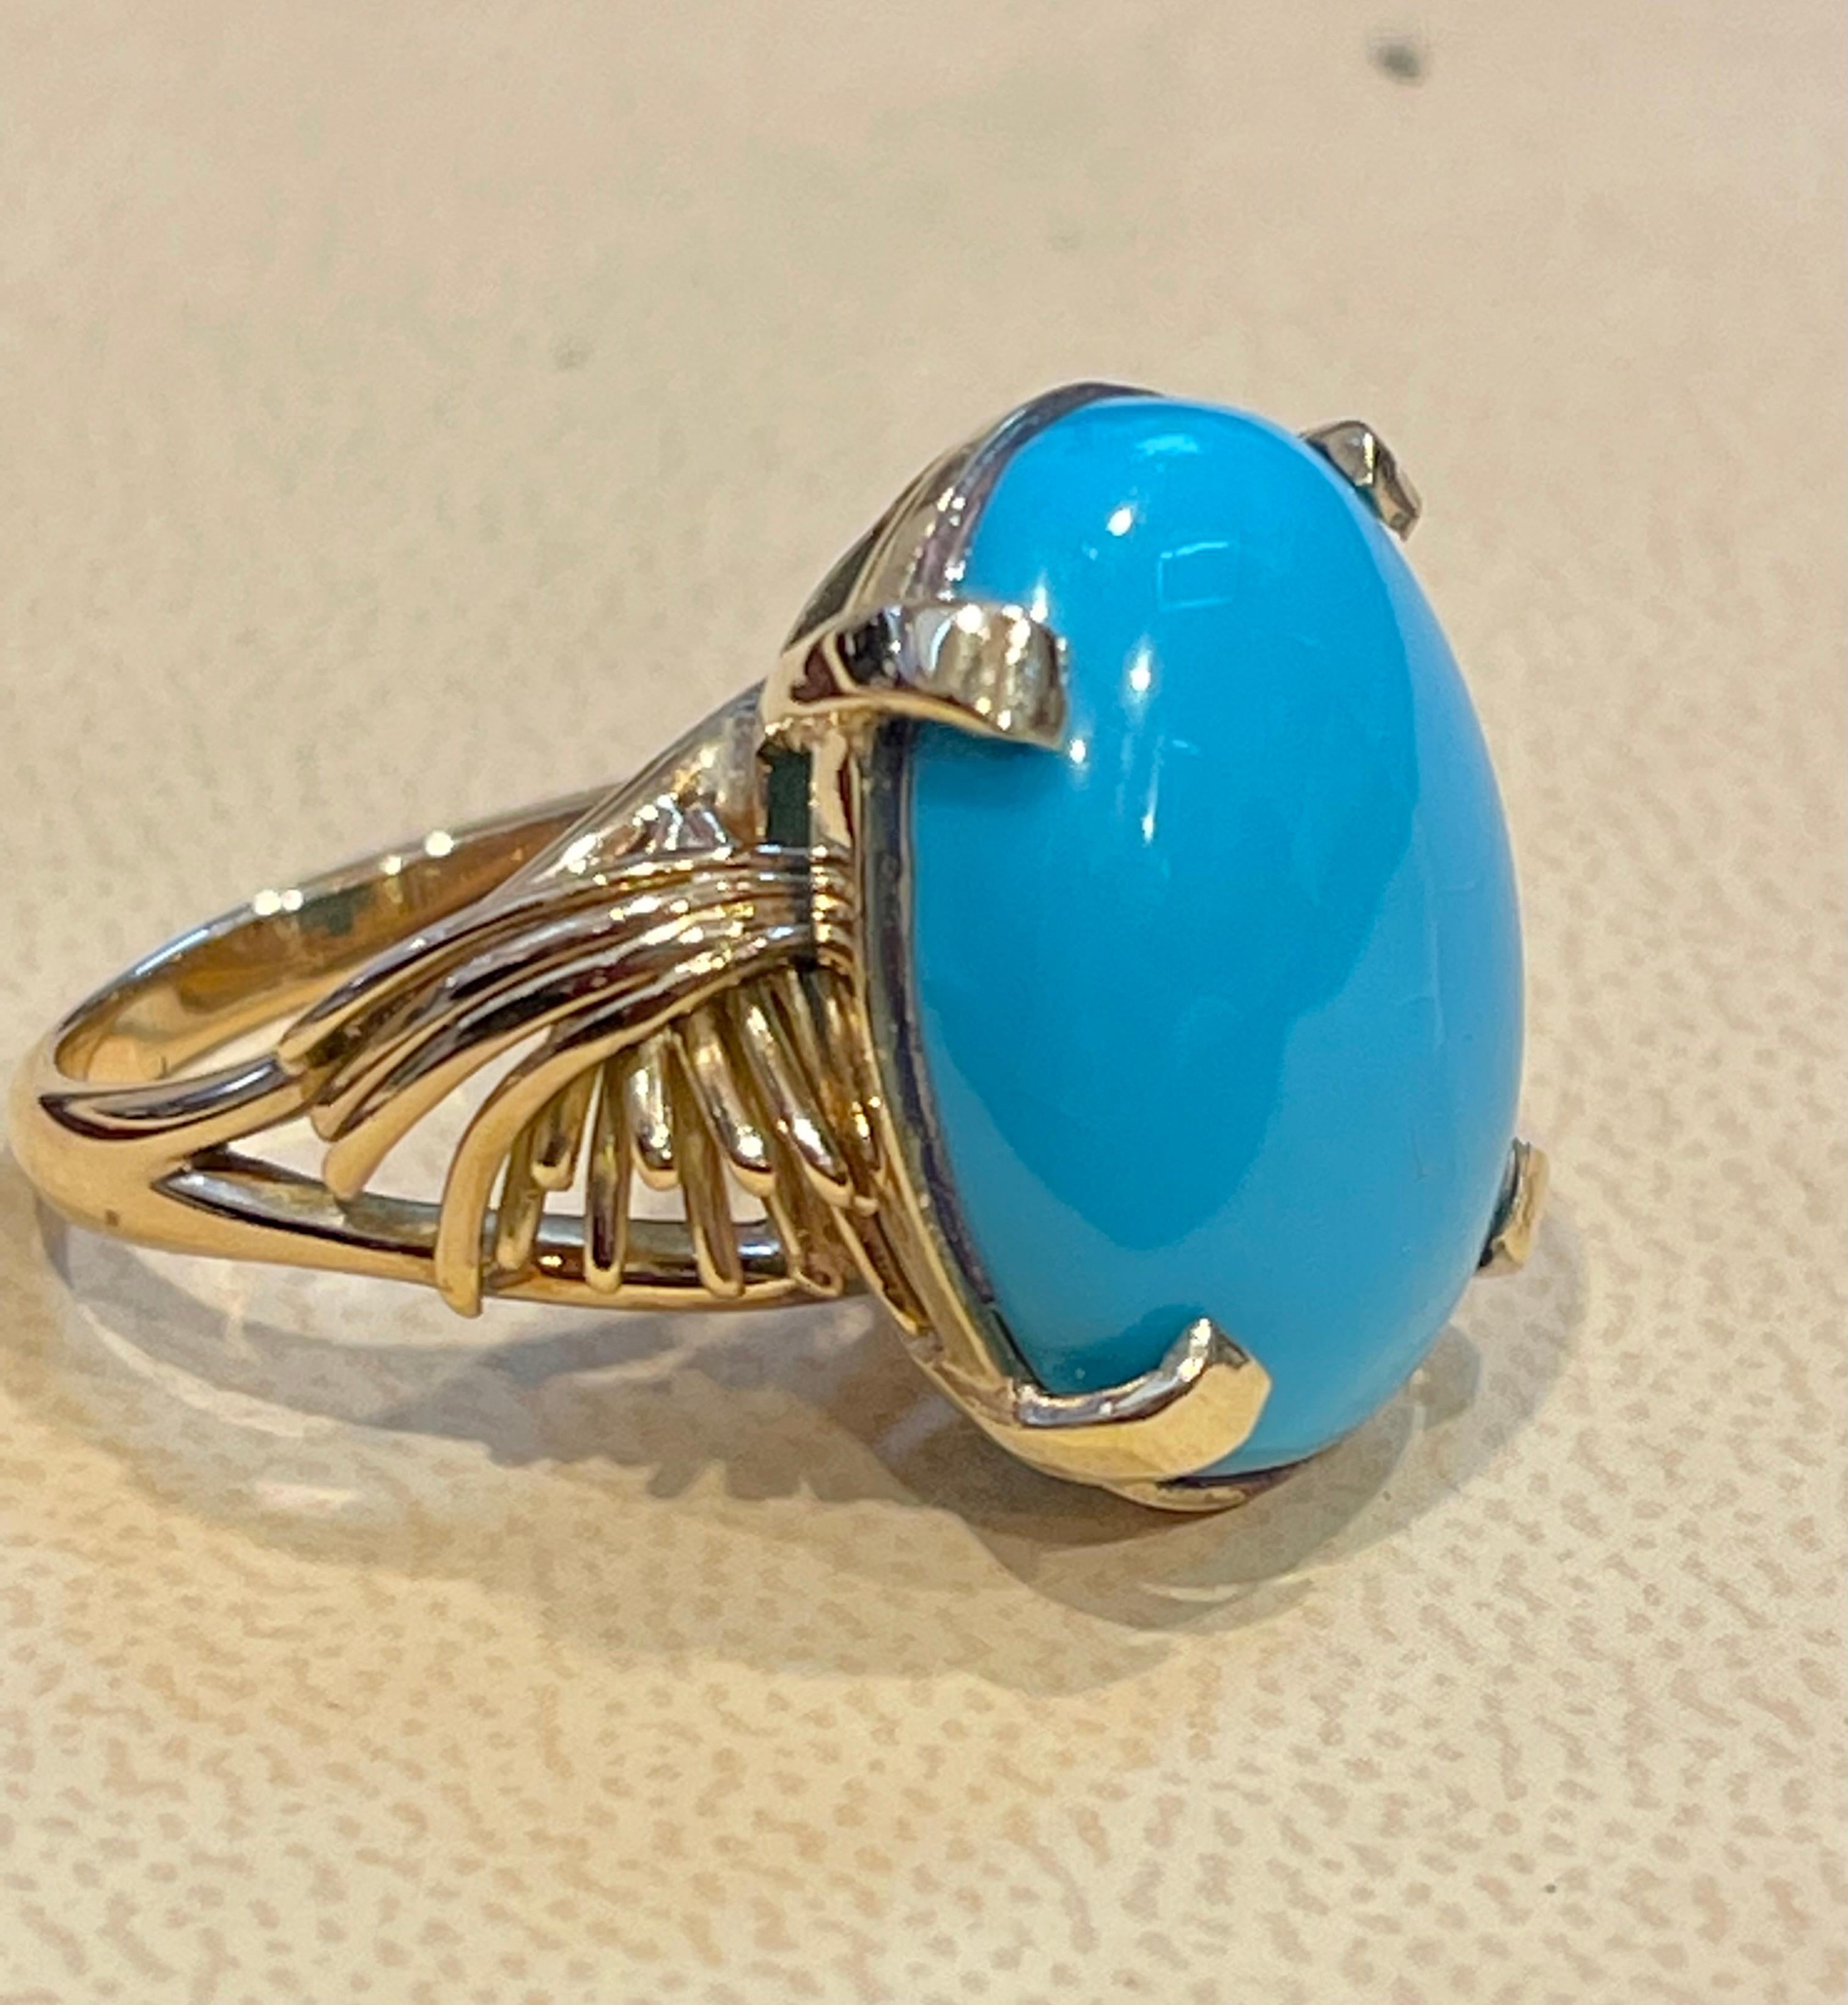 Cabochon Vintage 12 Ct Natural Oval Sleeping Beauty Turquoise Ring, 14 Kt Yellow Gold For Sale